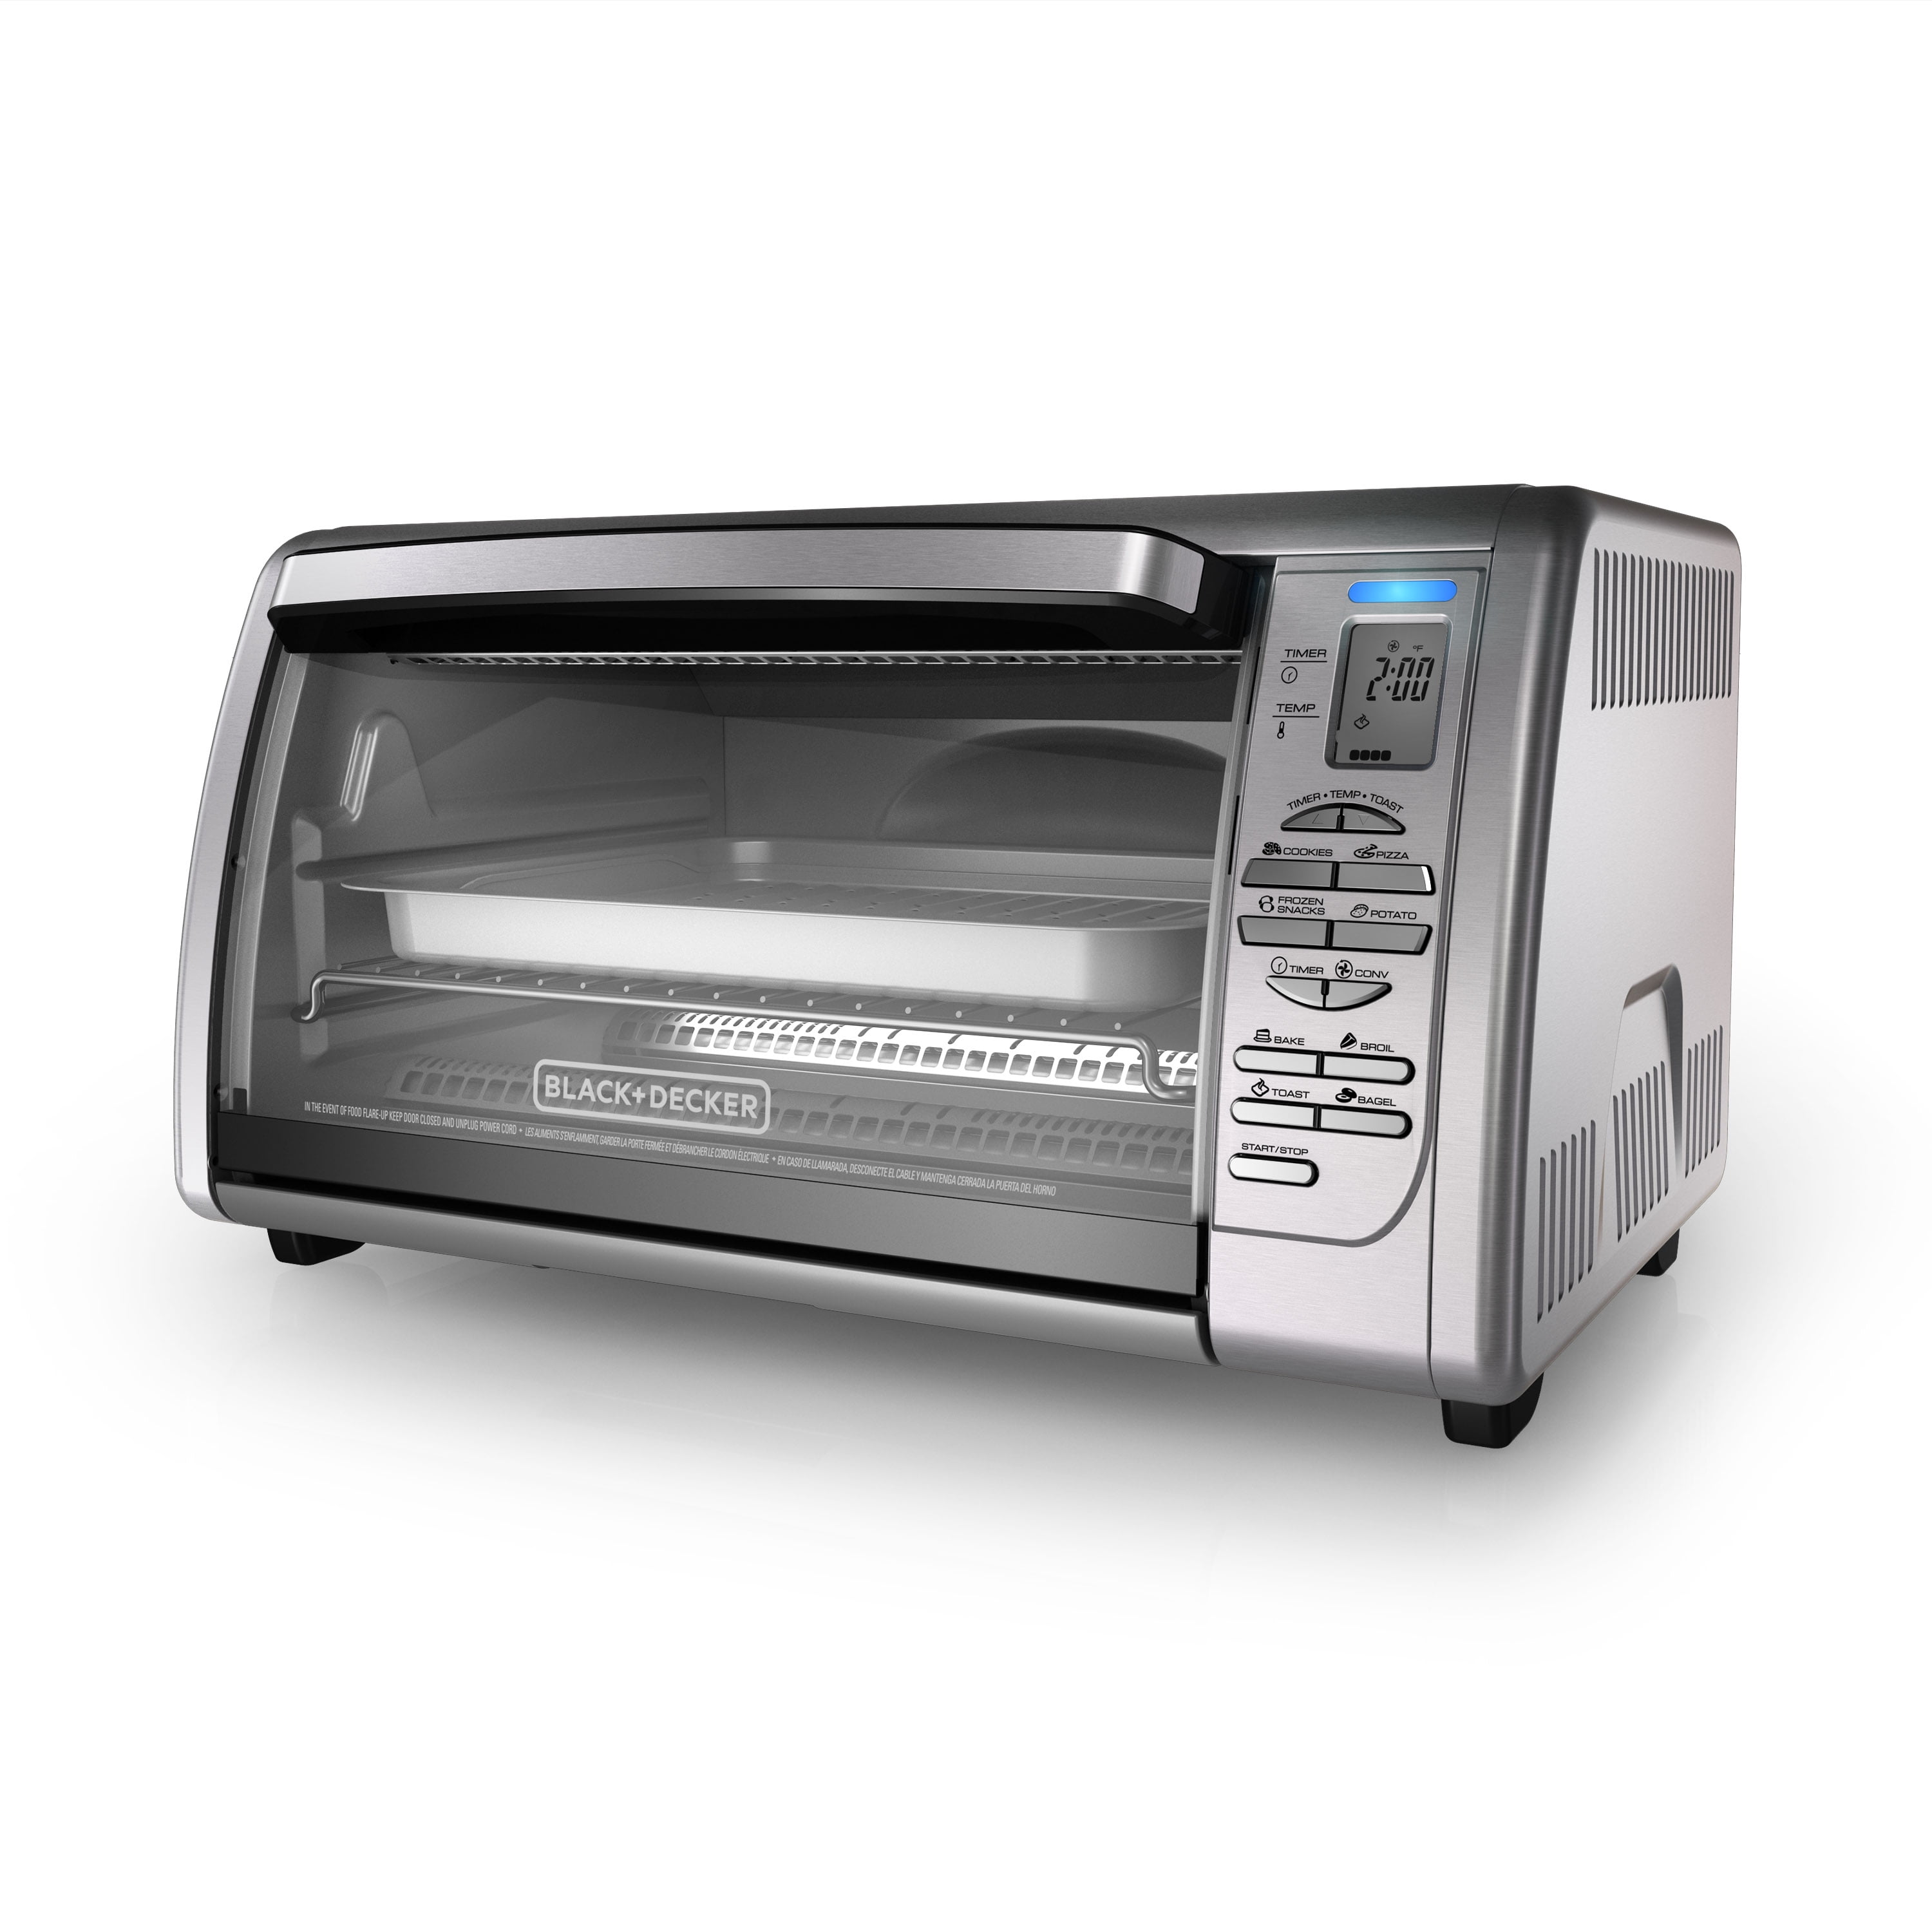 Black+Decker CTO6335S vs Toshiba AC25CEW-BS Toaster Oven: Large or